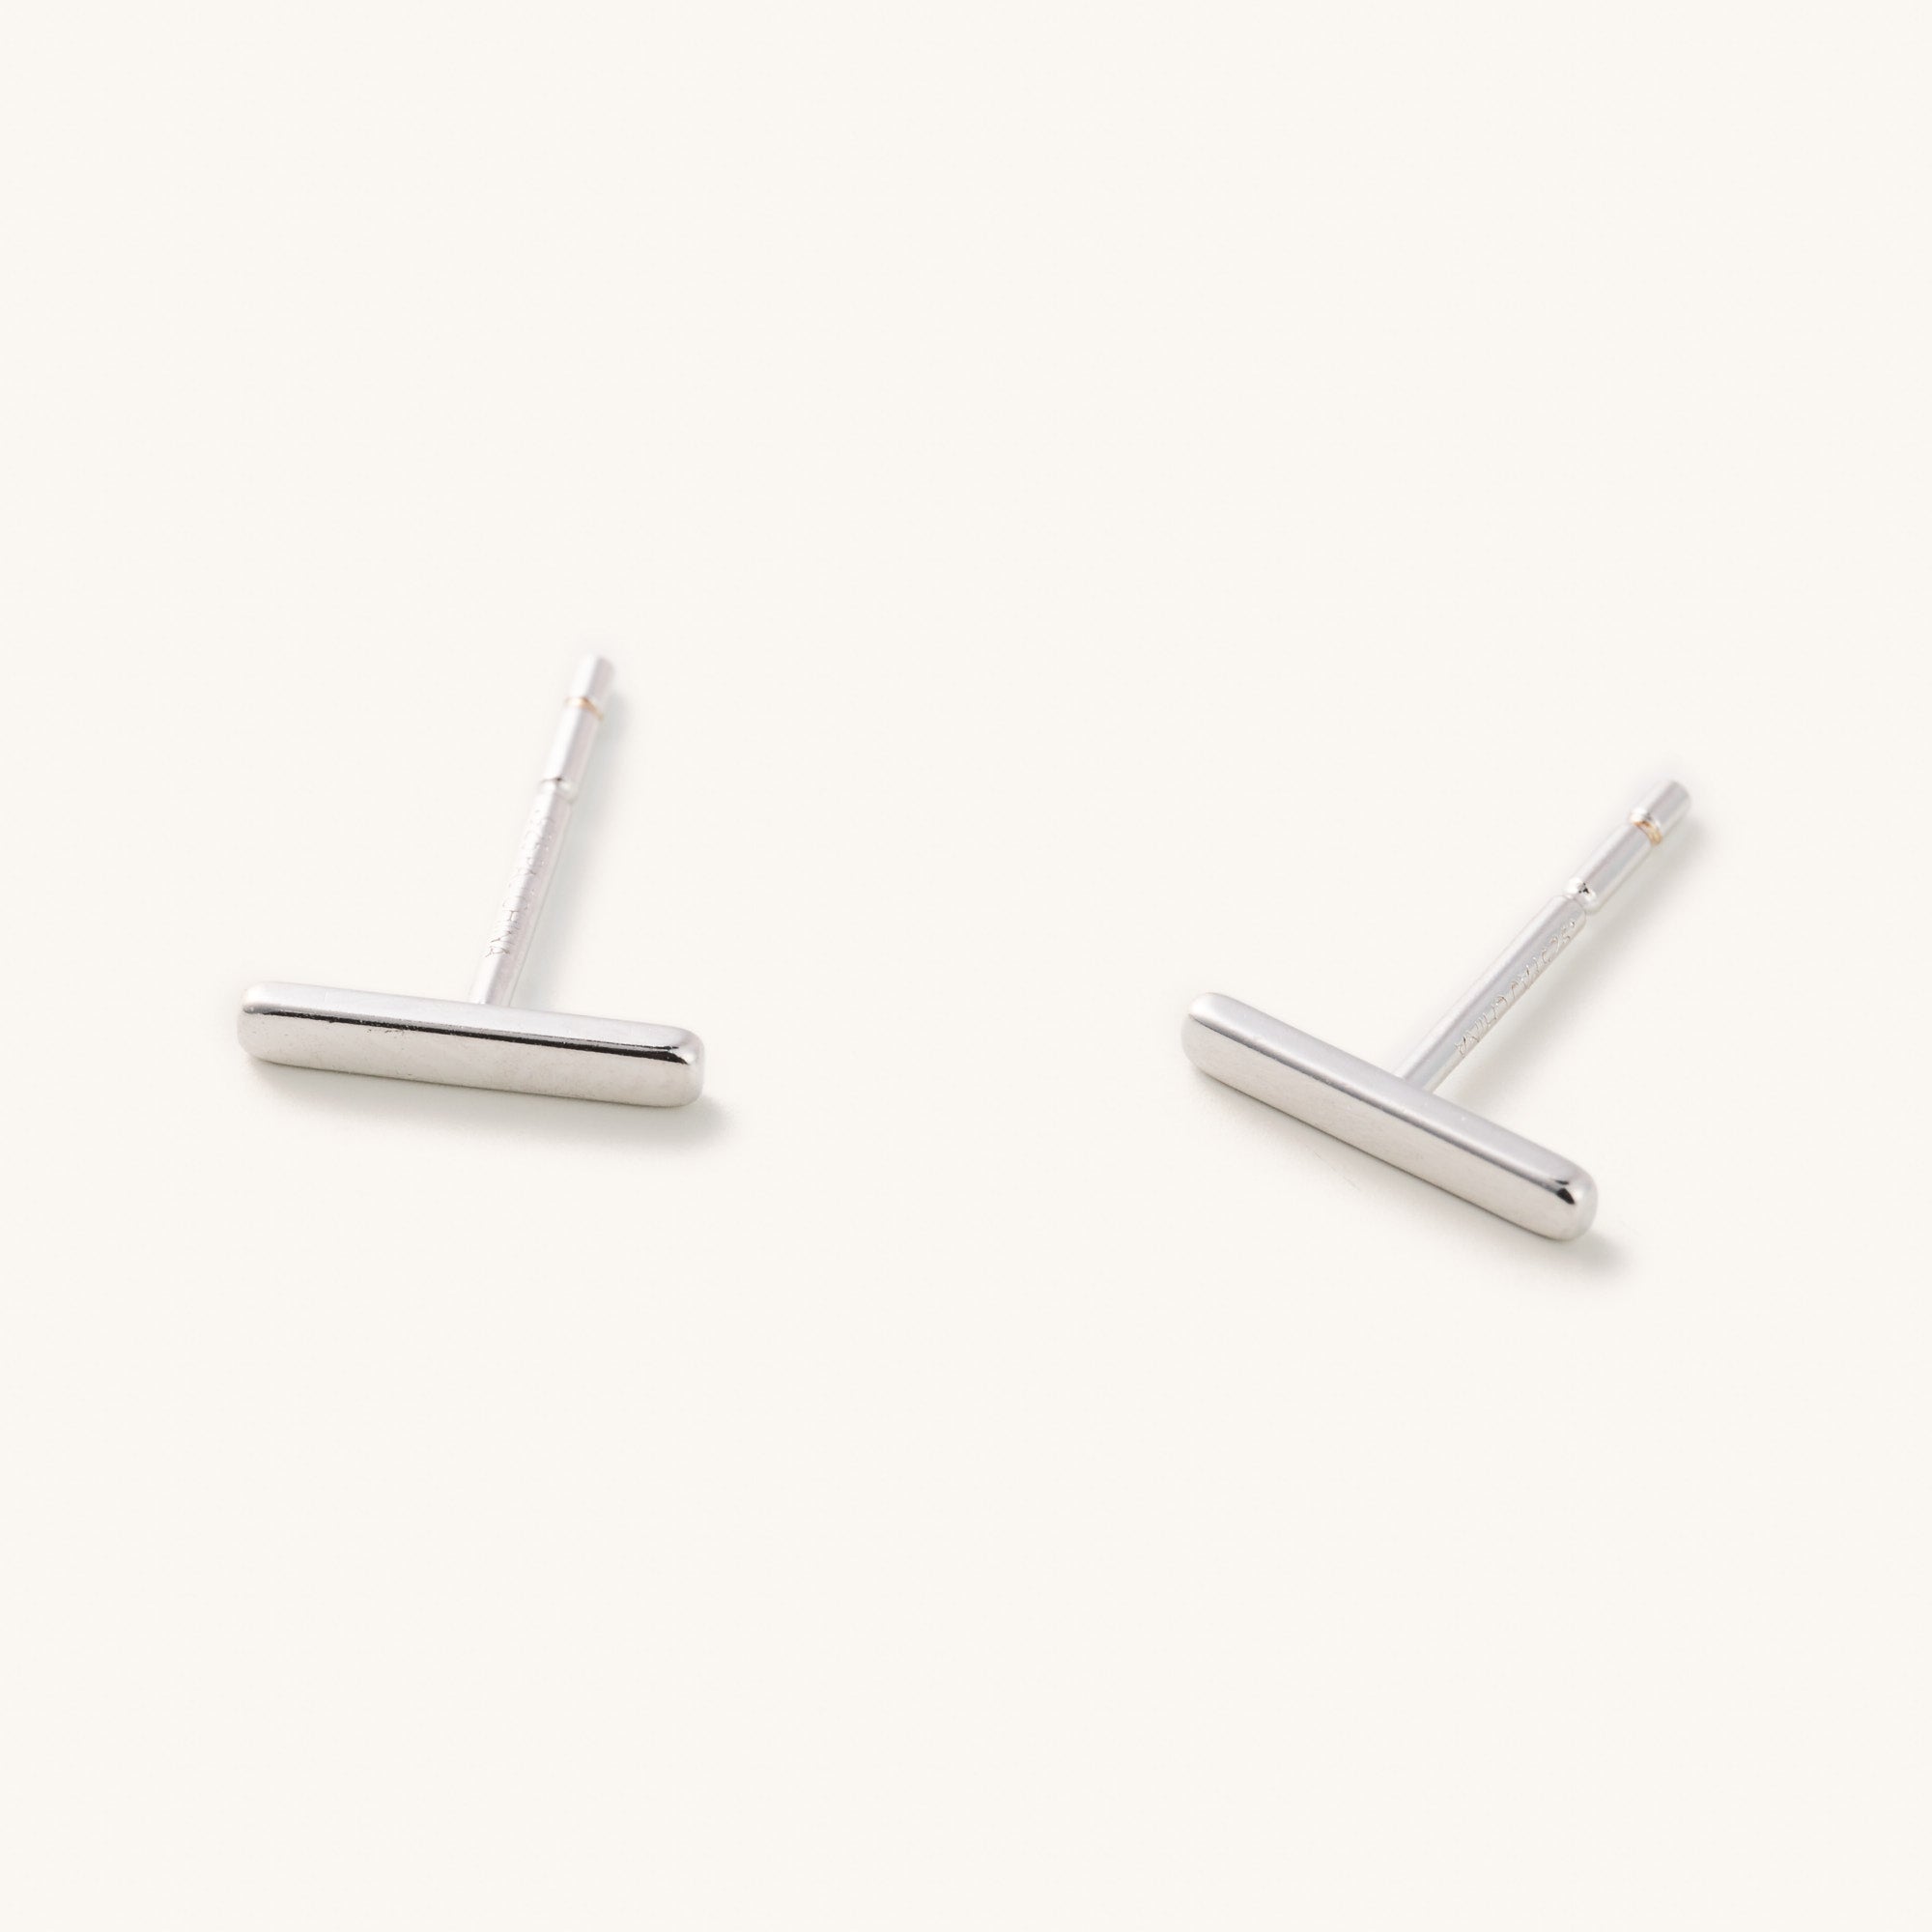 GOLD PLATED OVER STERLING SILVER BAR STUD EARRINGS - Walmart.com